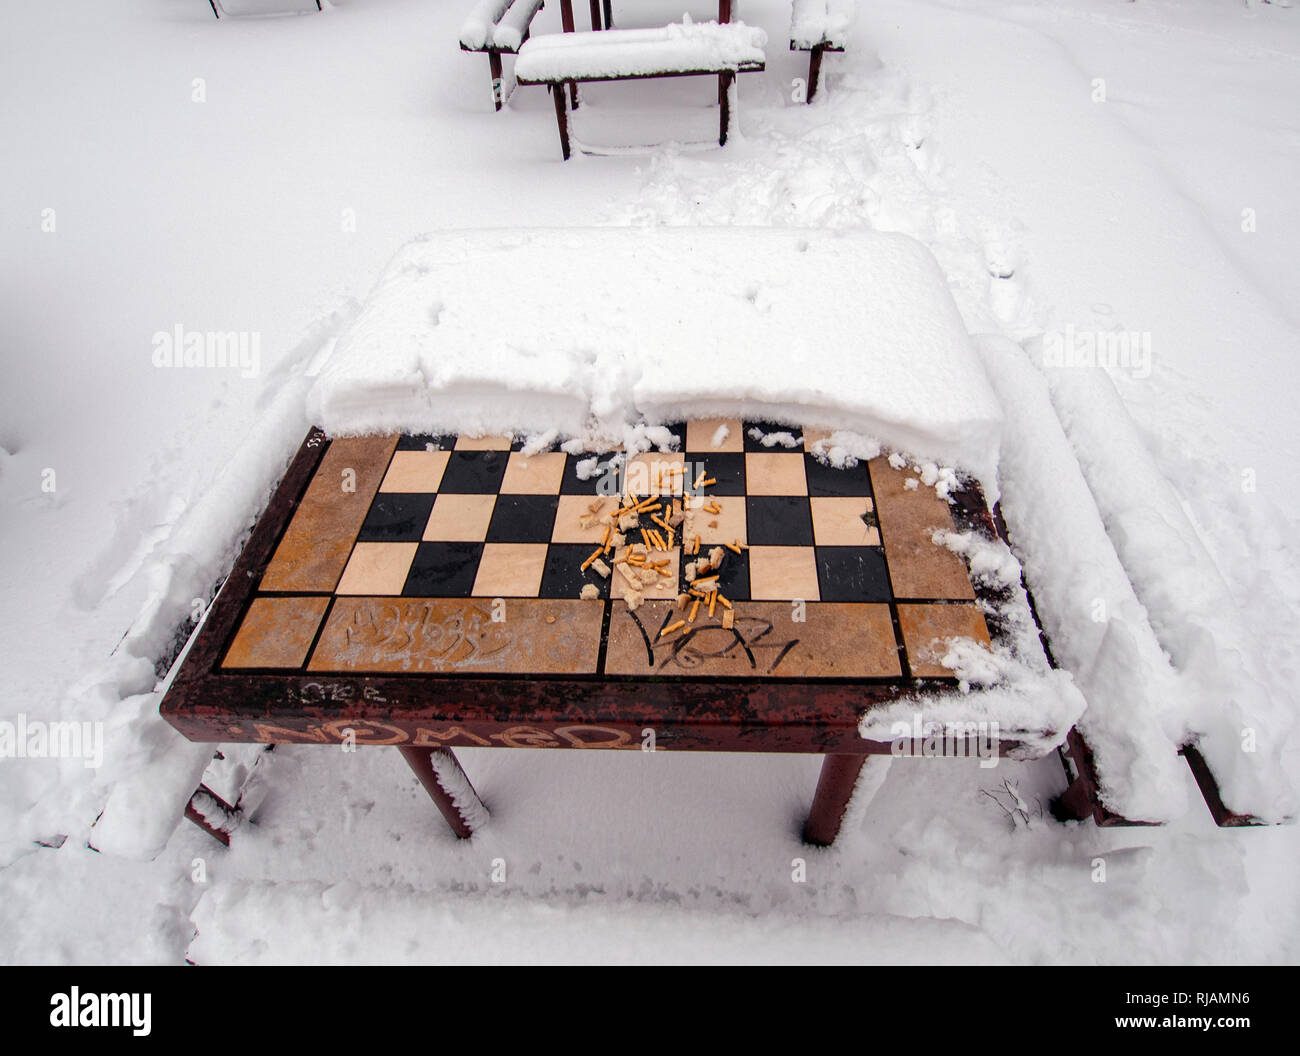 LODZ, POLAND- FEBRUARY 4th 2019: An outdoor chess board covered in snow. Stock Photo